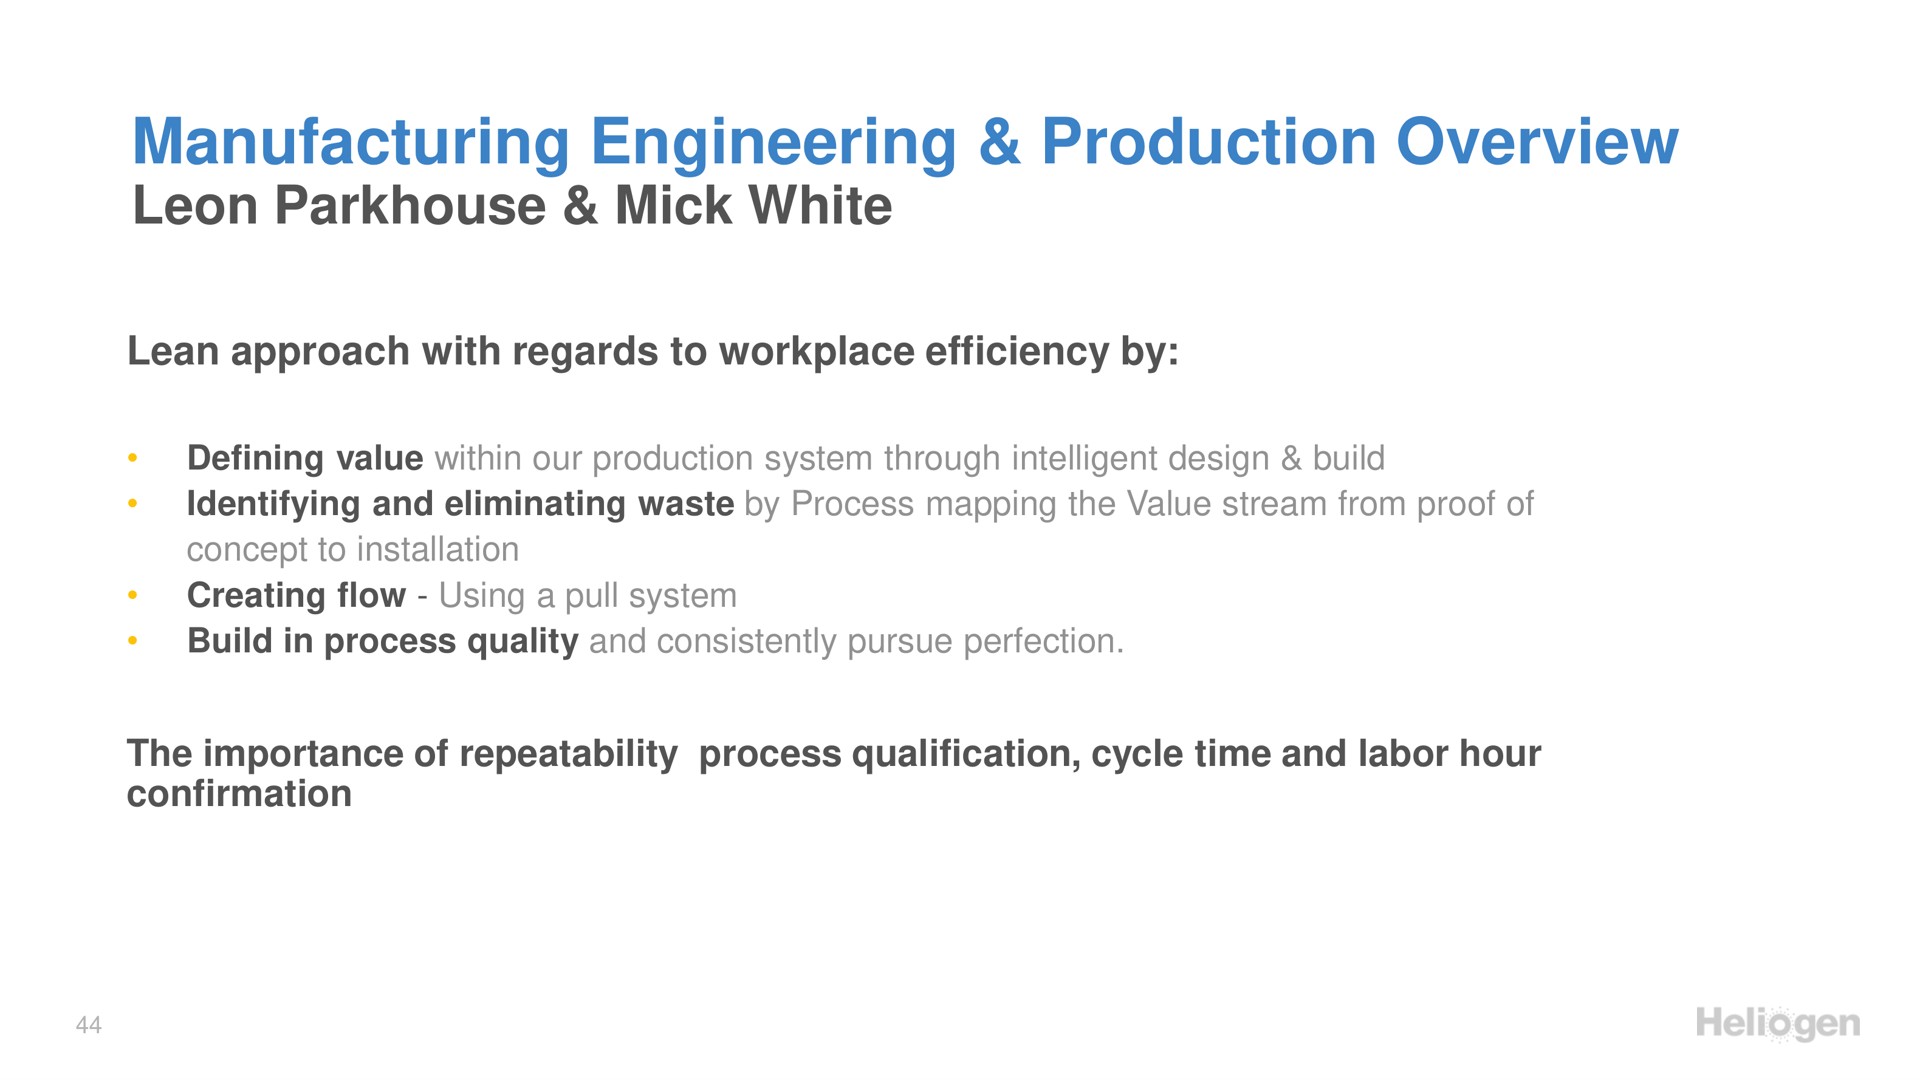 manufacturing engineering production overview mick white | Heliogen